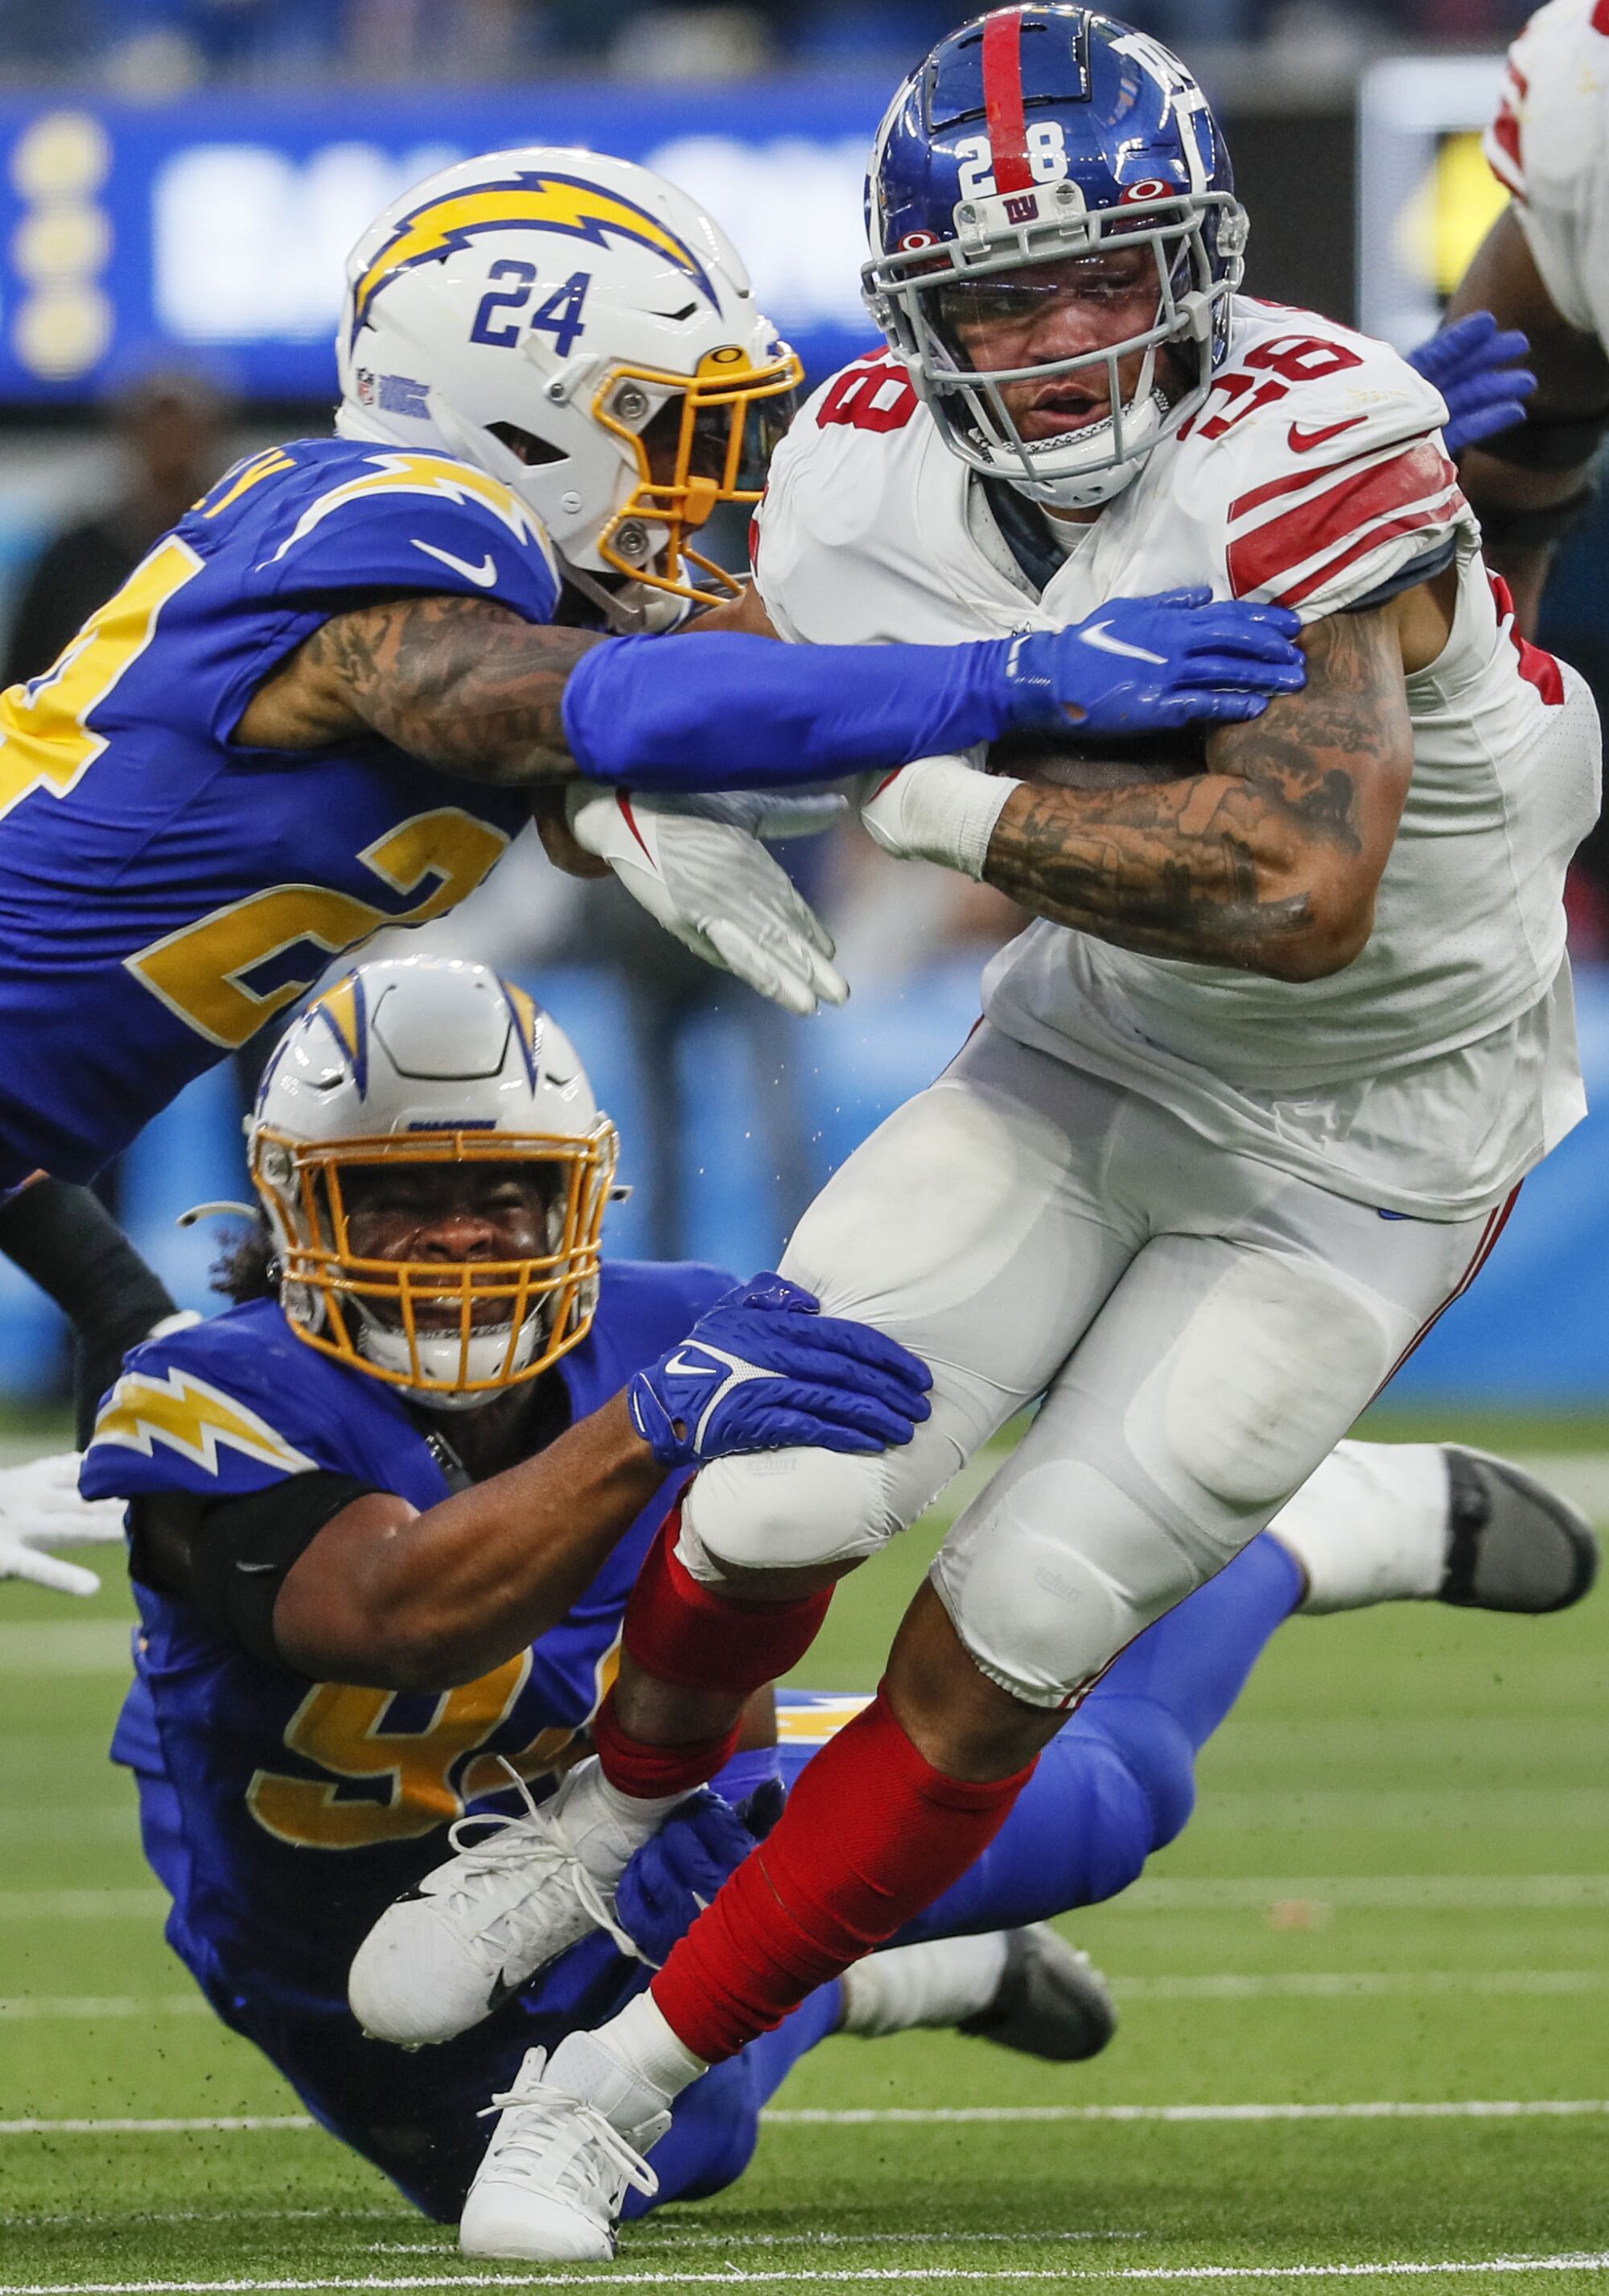 New York Giants running back Devontae Booker eludes Chargers tacklers on a second-half run.